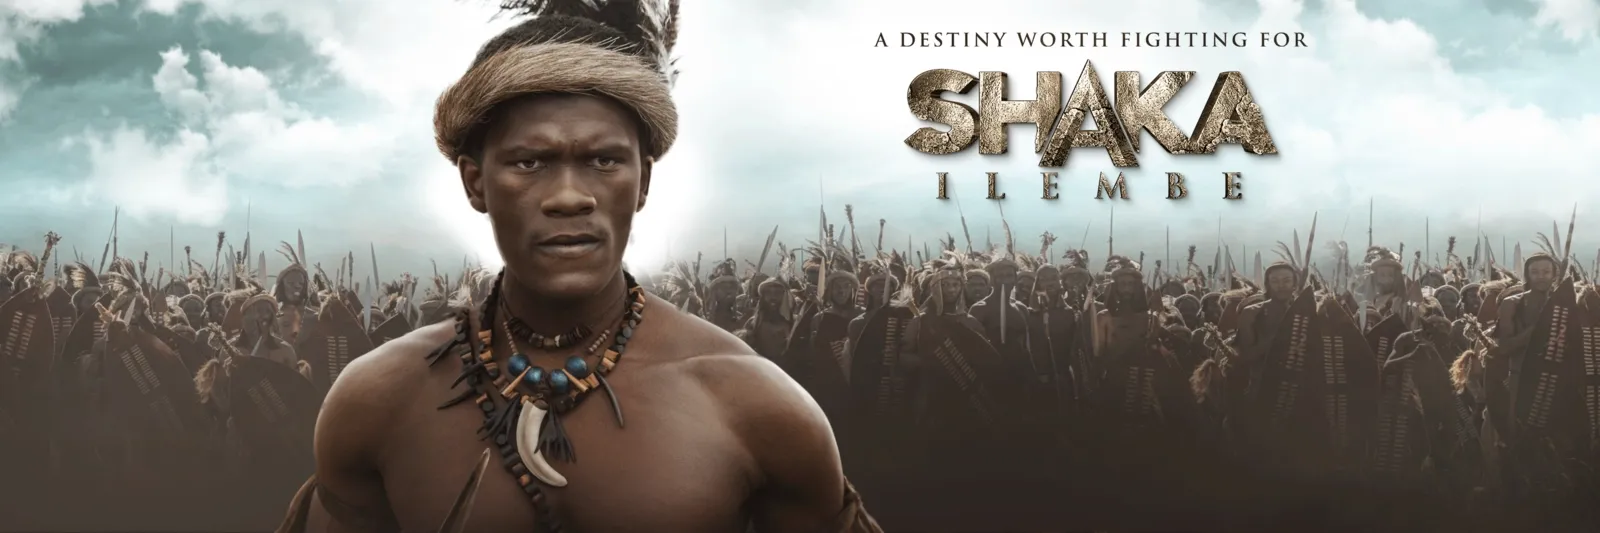 Govt Cheers to Shaka Ilembe Movie as A True Reflection Of African ...